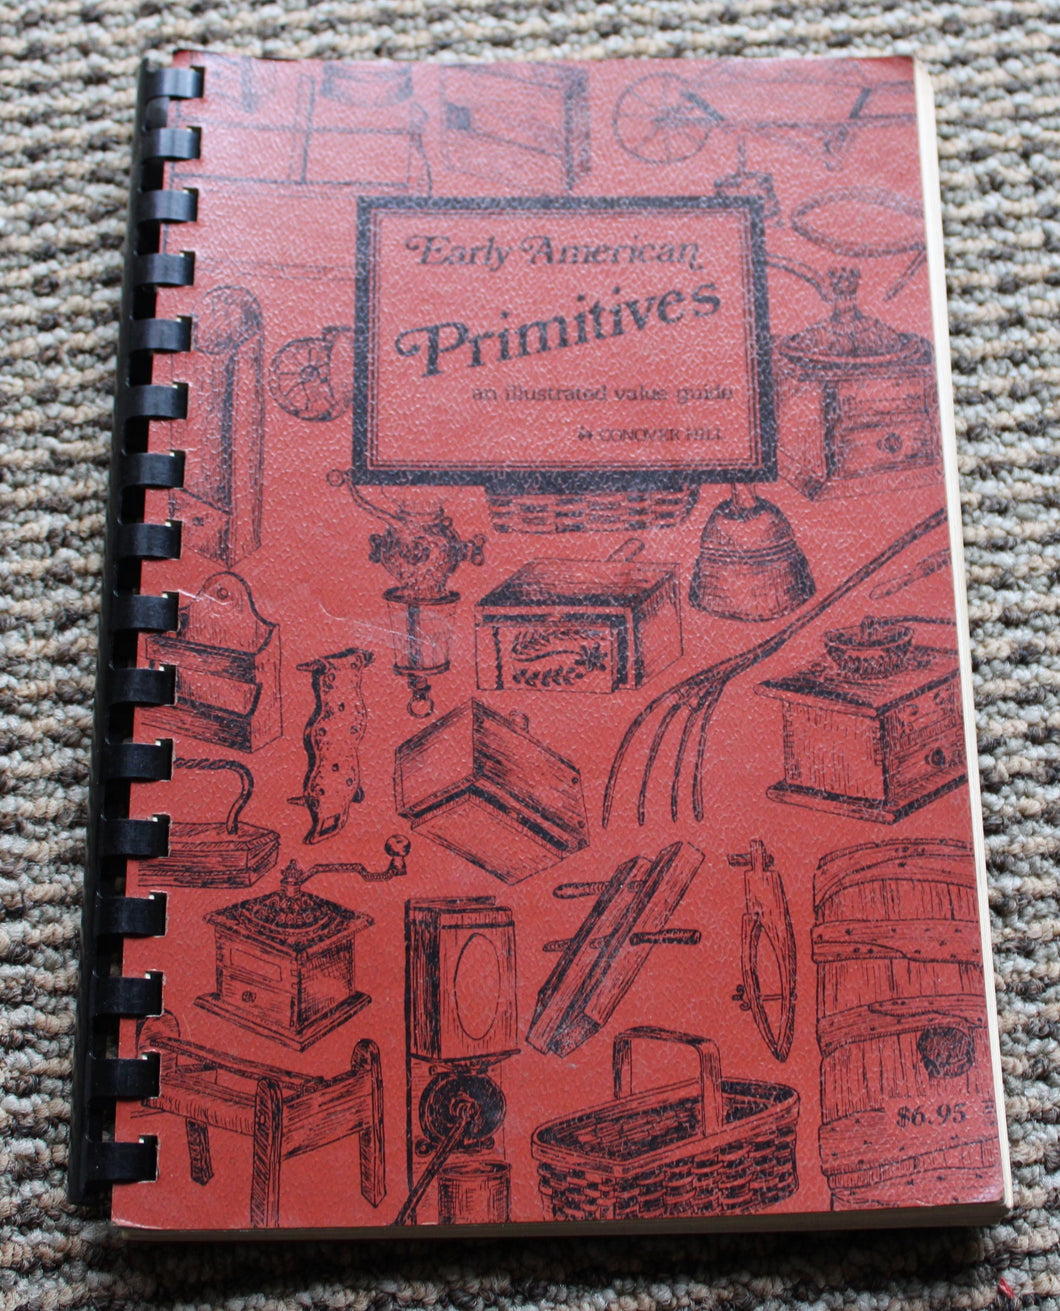 Early American Primitives and illustrated value guide